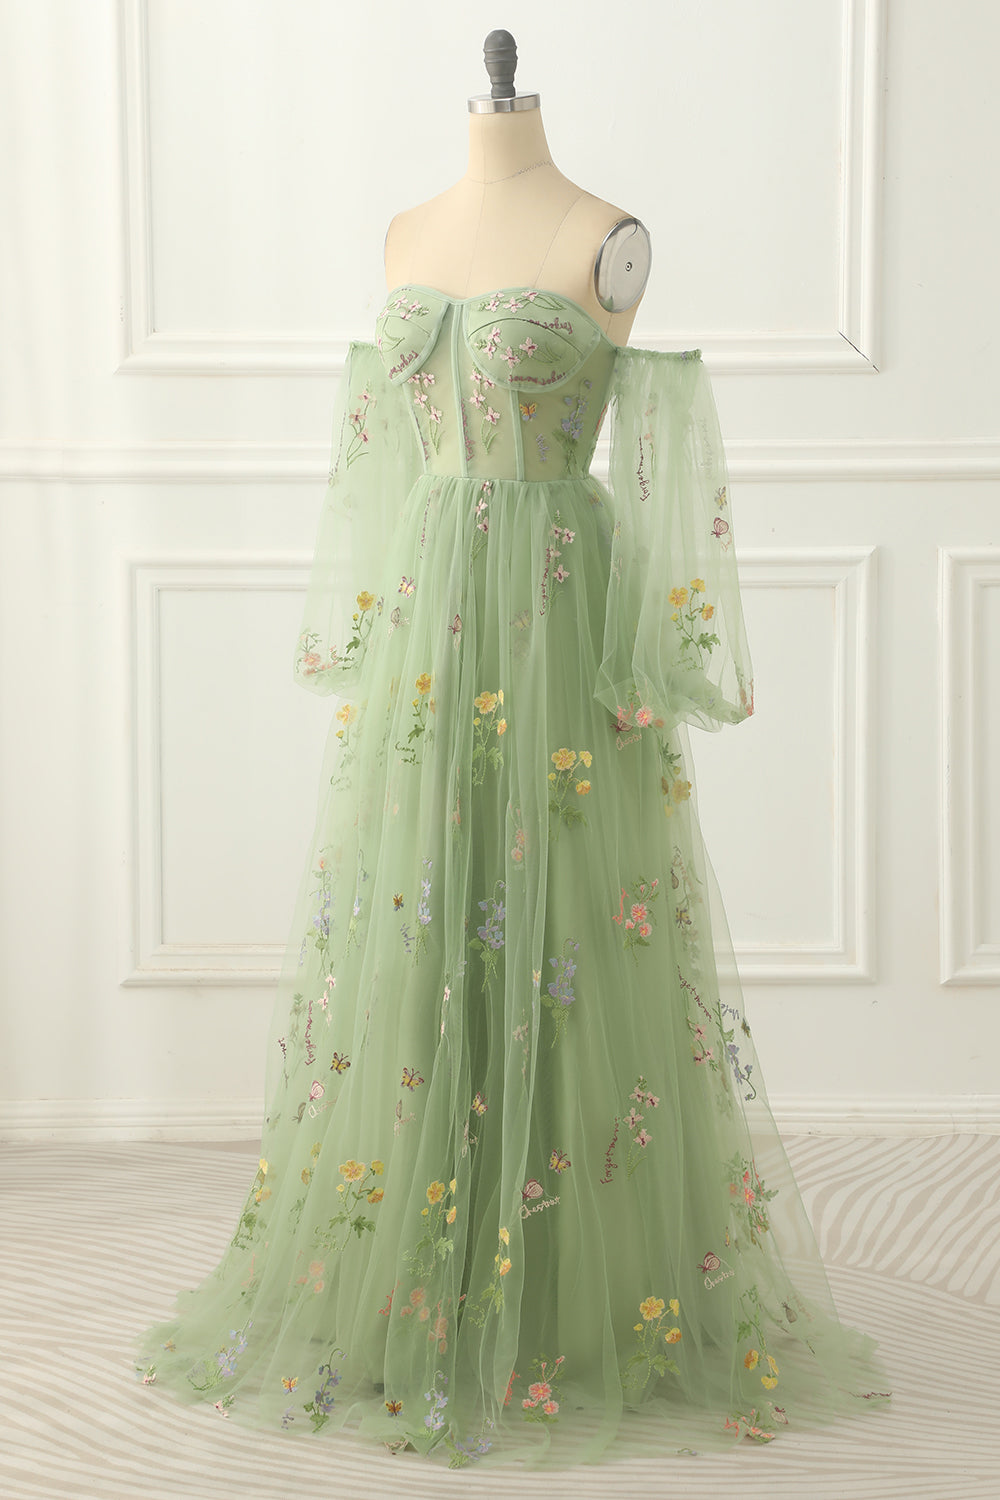 Wedding Inspo, Green Tulle Off the Shoulder A-line Prom Dress with Floral Embroidery